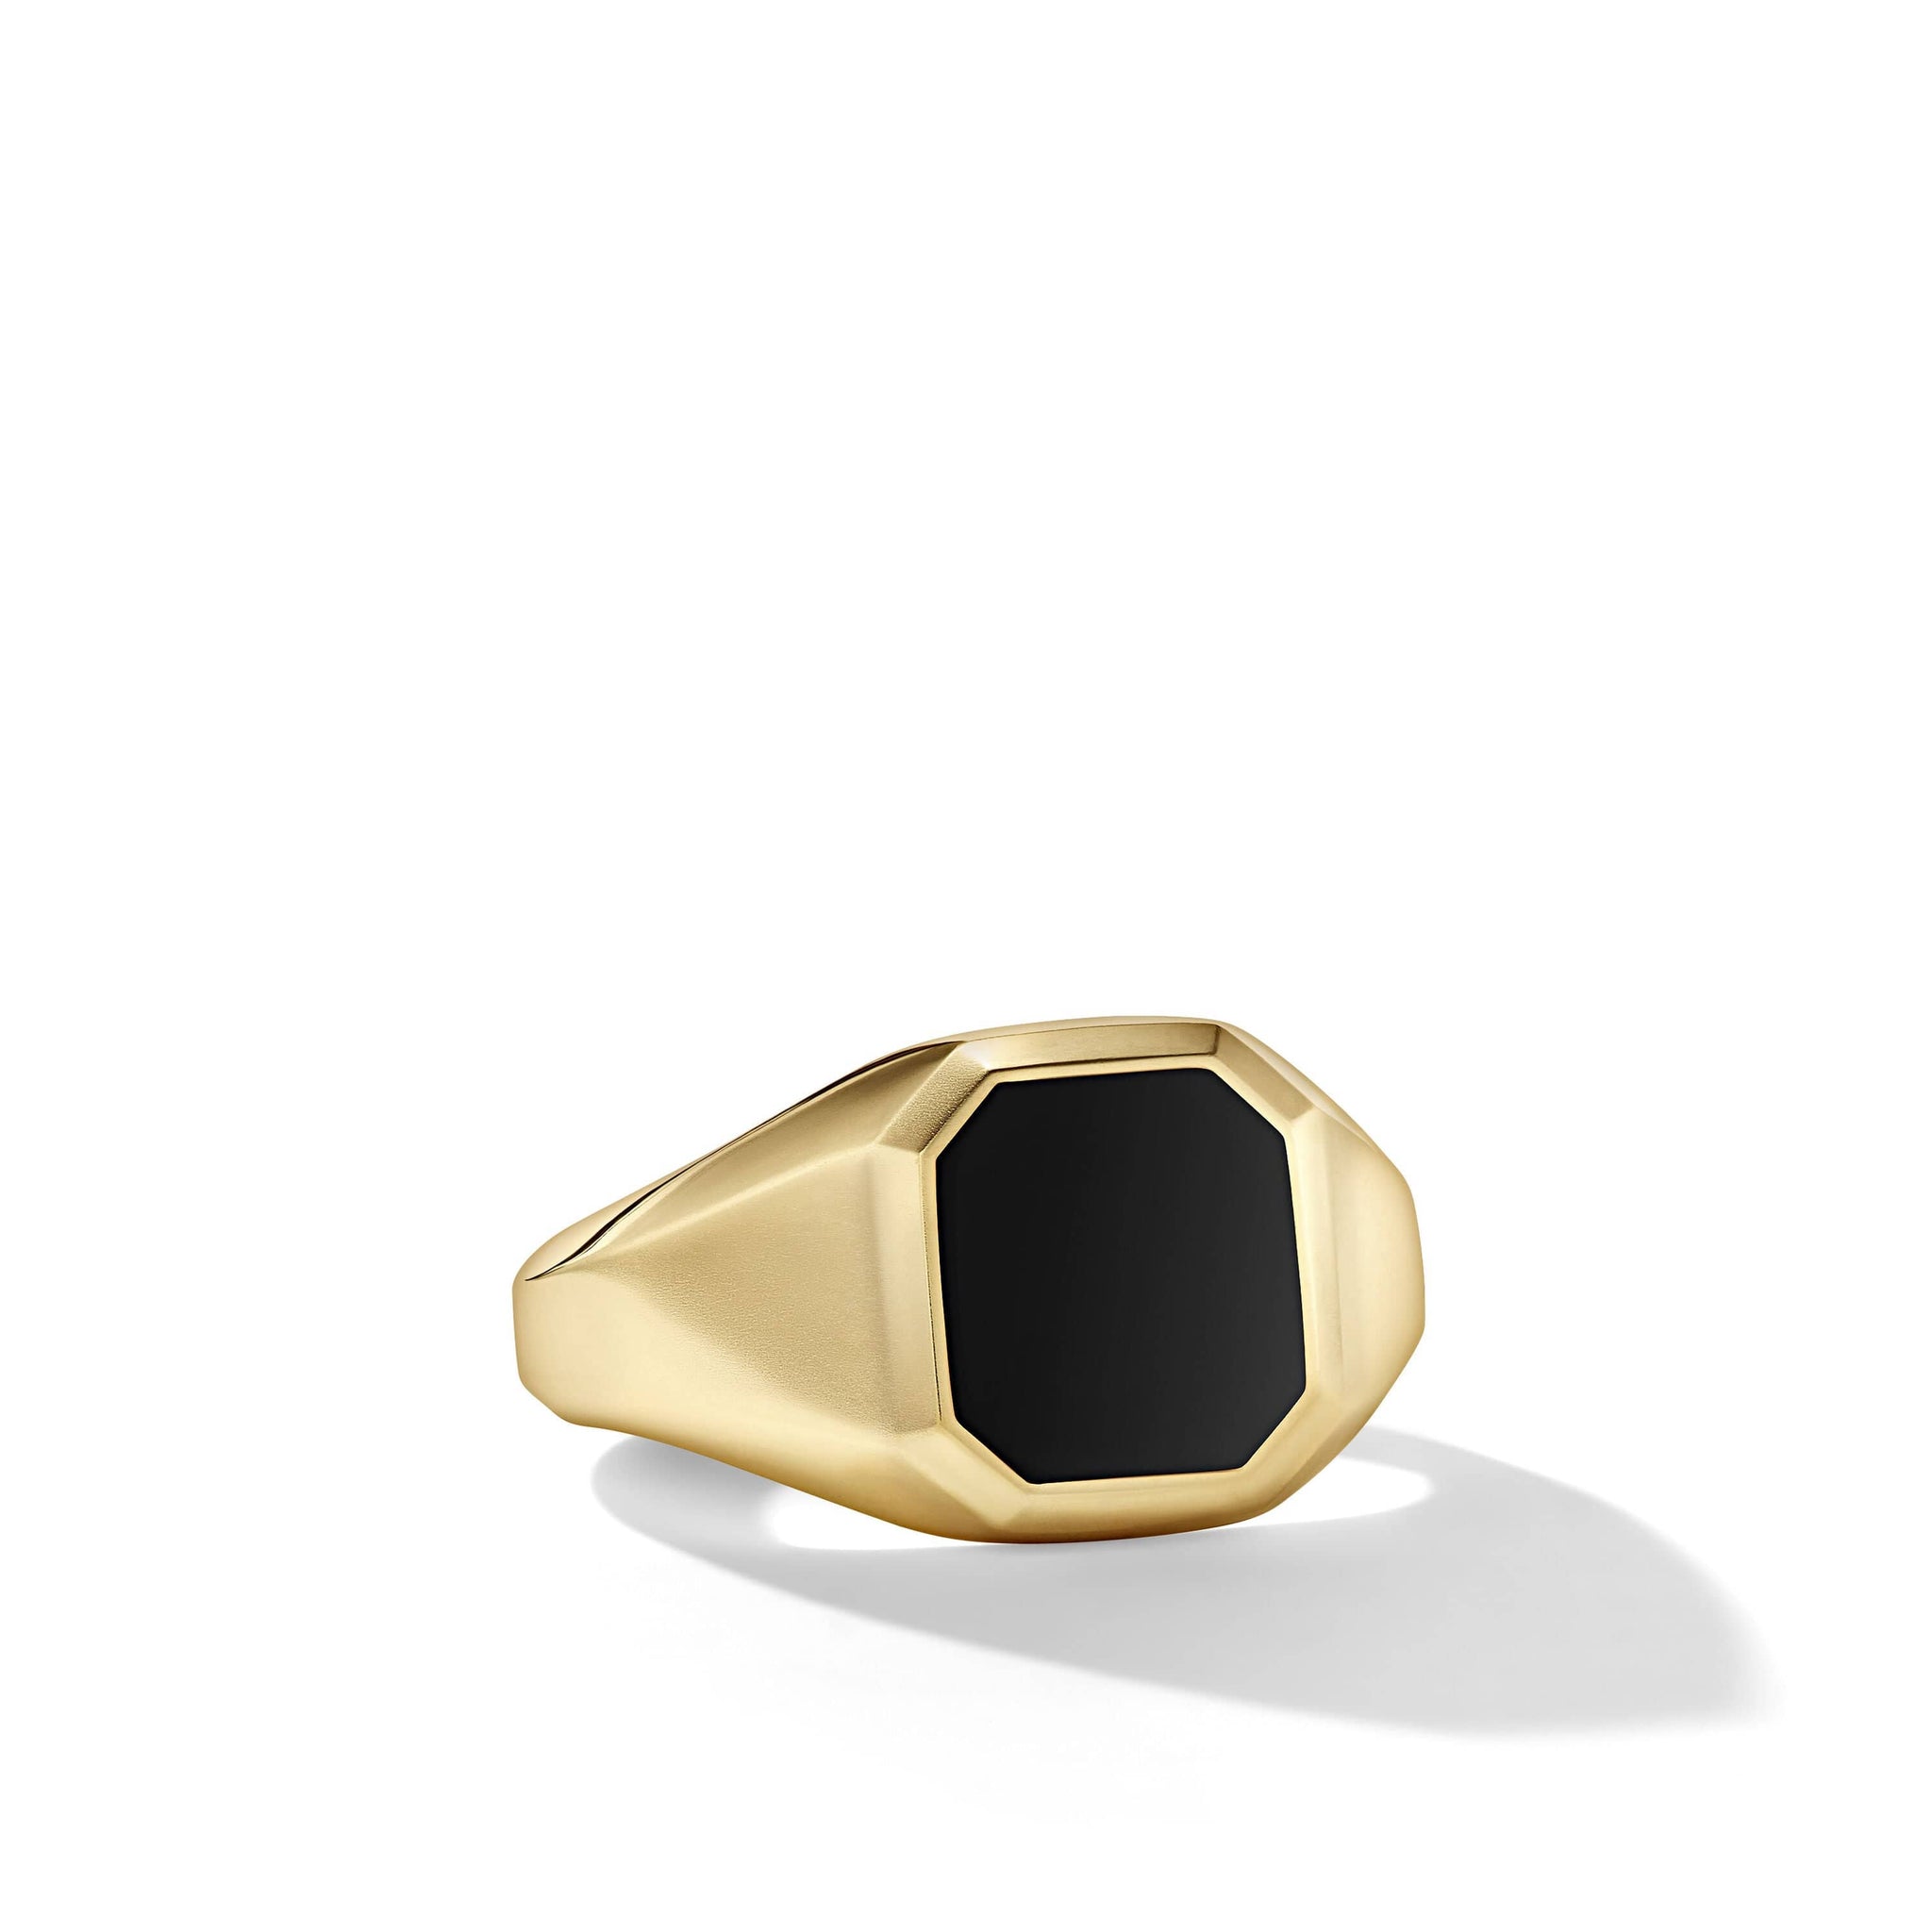 Streamline® Signet Ring in 18K Yellow Gold with Black Onyx